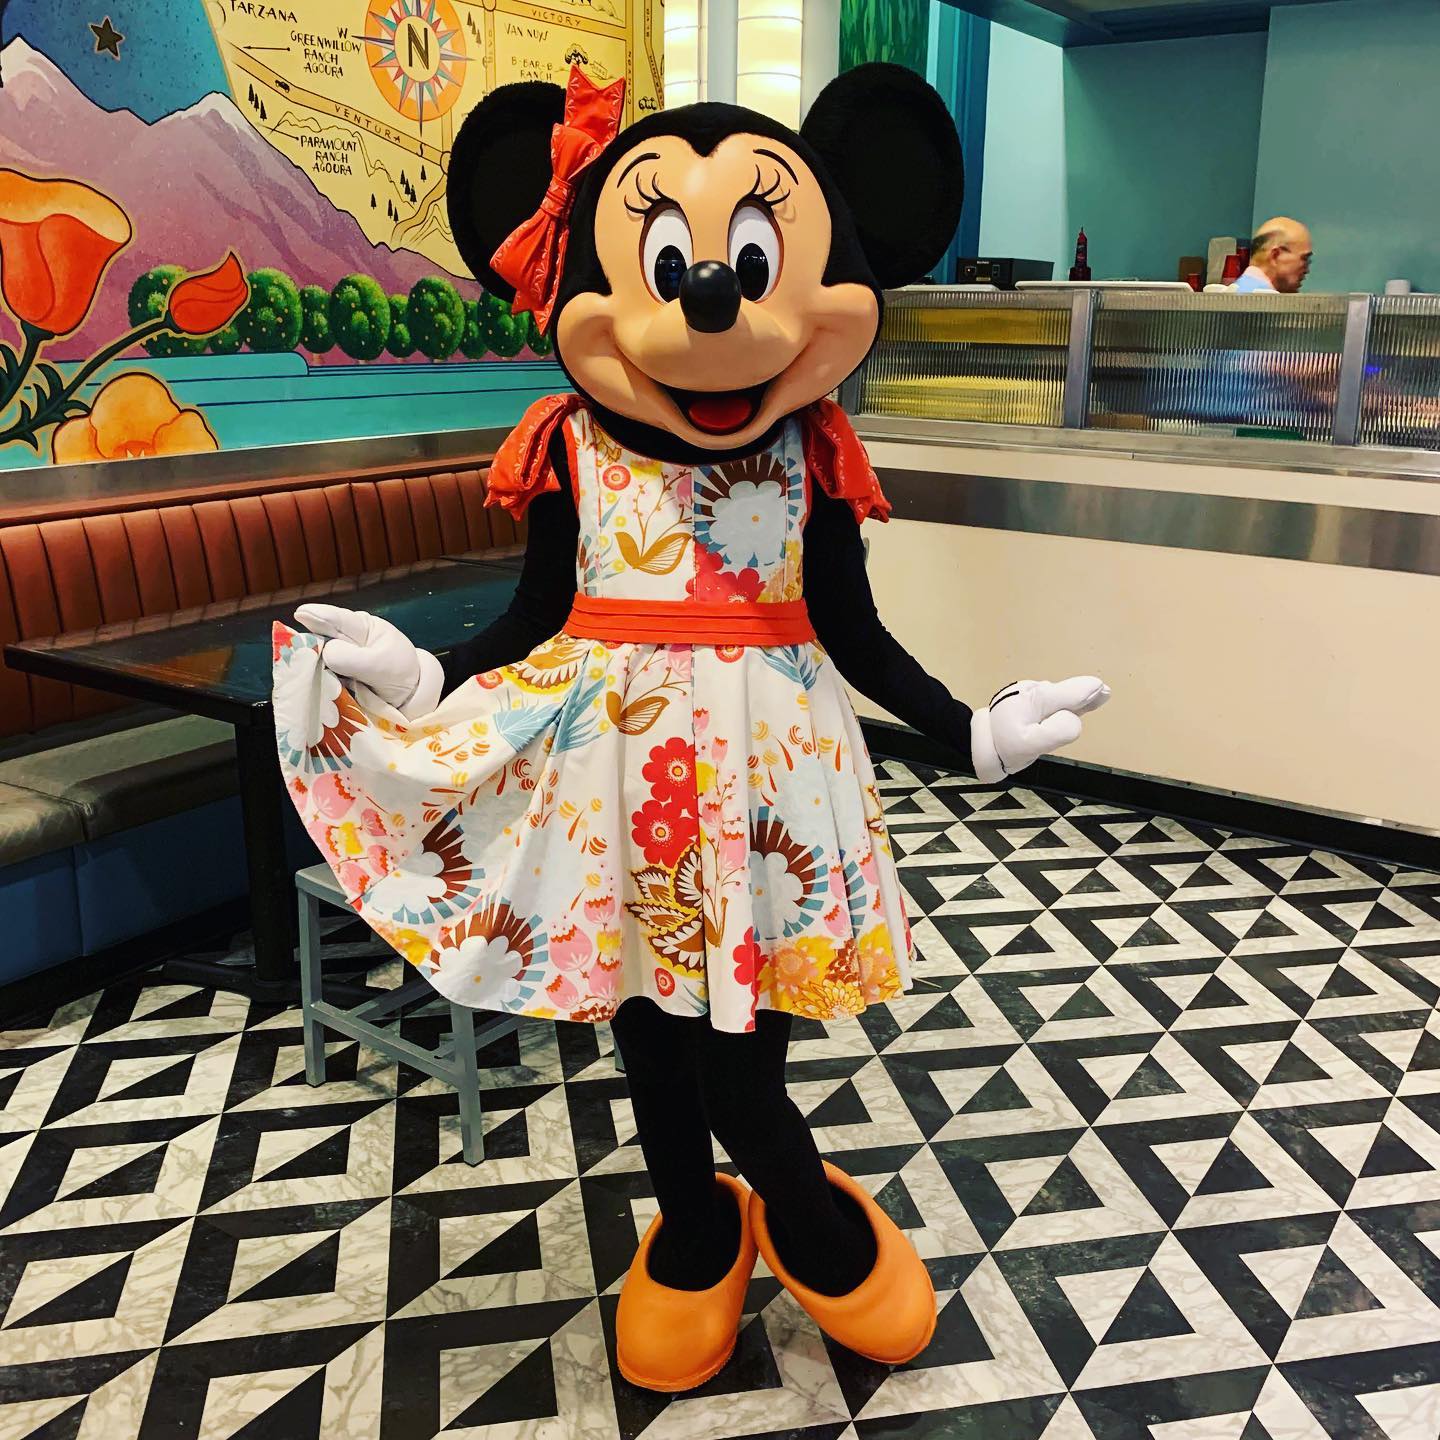 Minnie at Disney's Hollywood and Vine